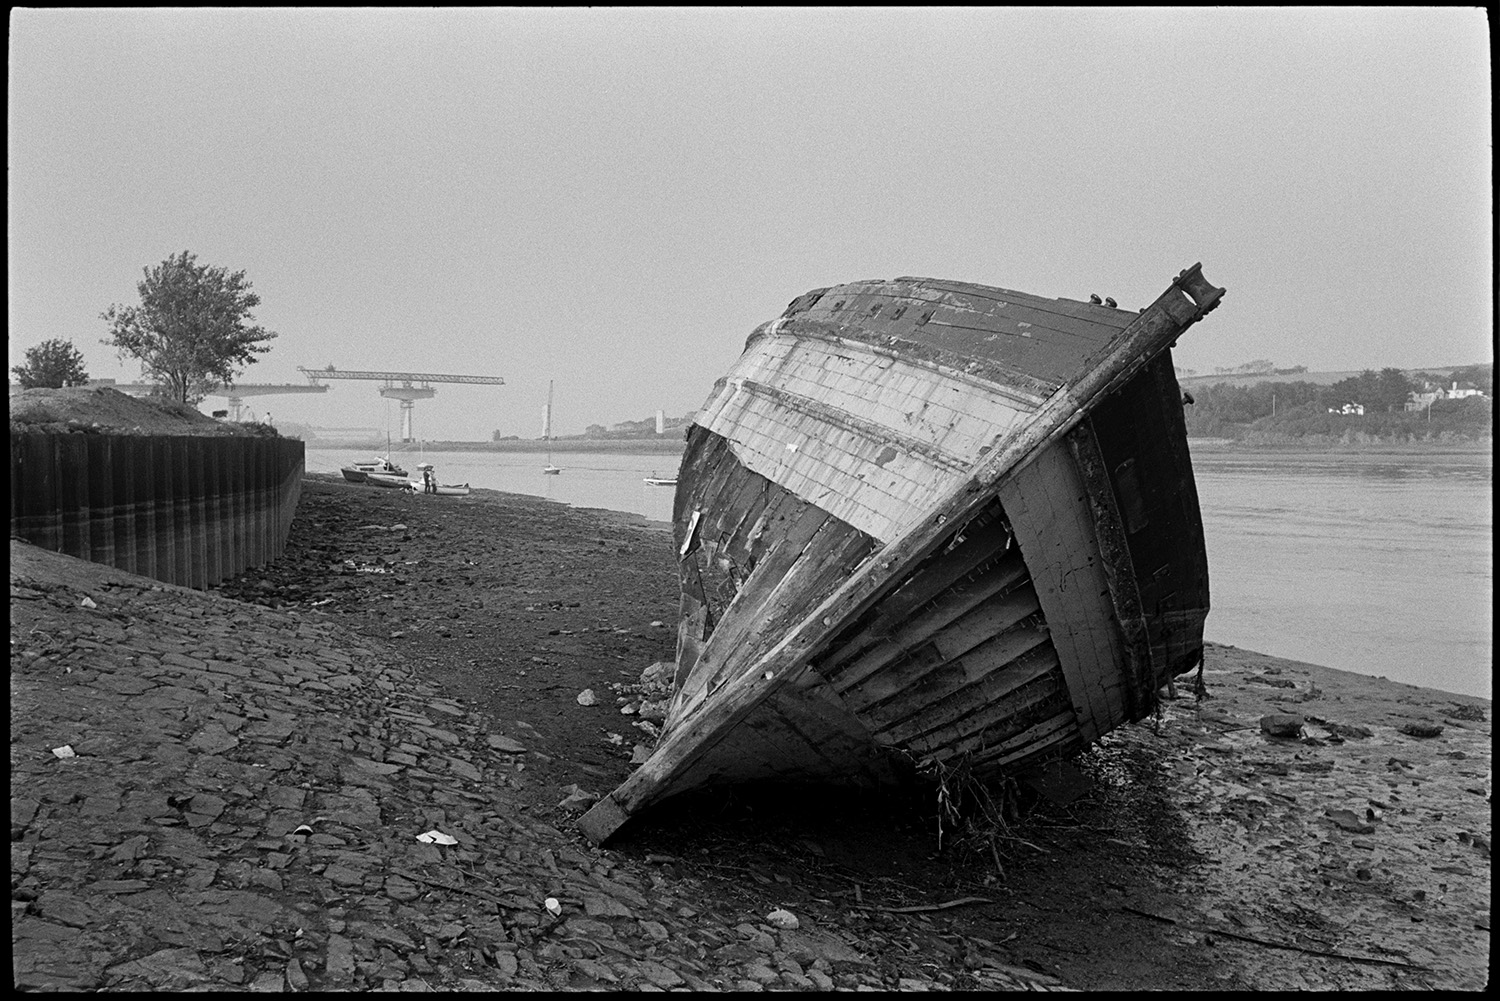 Remains of wooden fishing boat being broken up, new bridge construction behind.
[An old wooden fishing boat on the banks of the River Torridge at Bideford. Bideford New Bridge is being constructed in the background.]